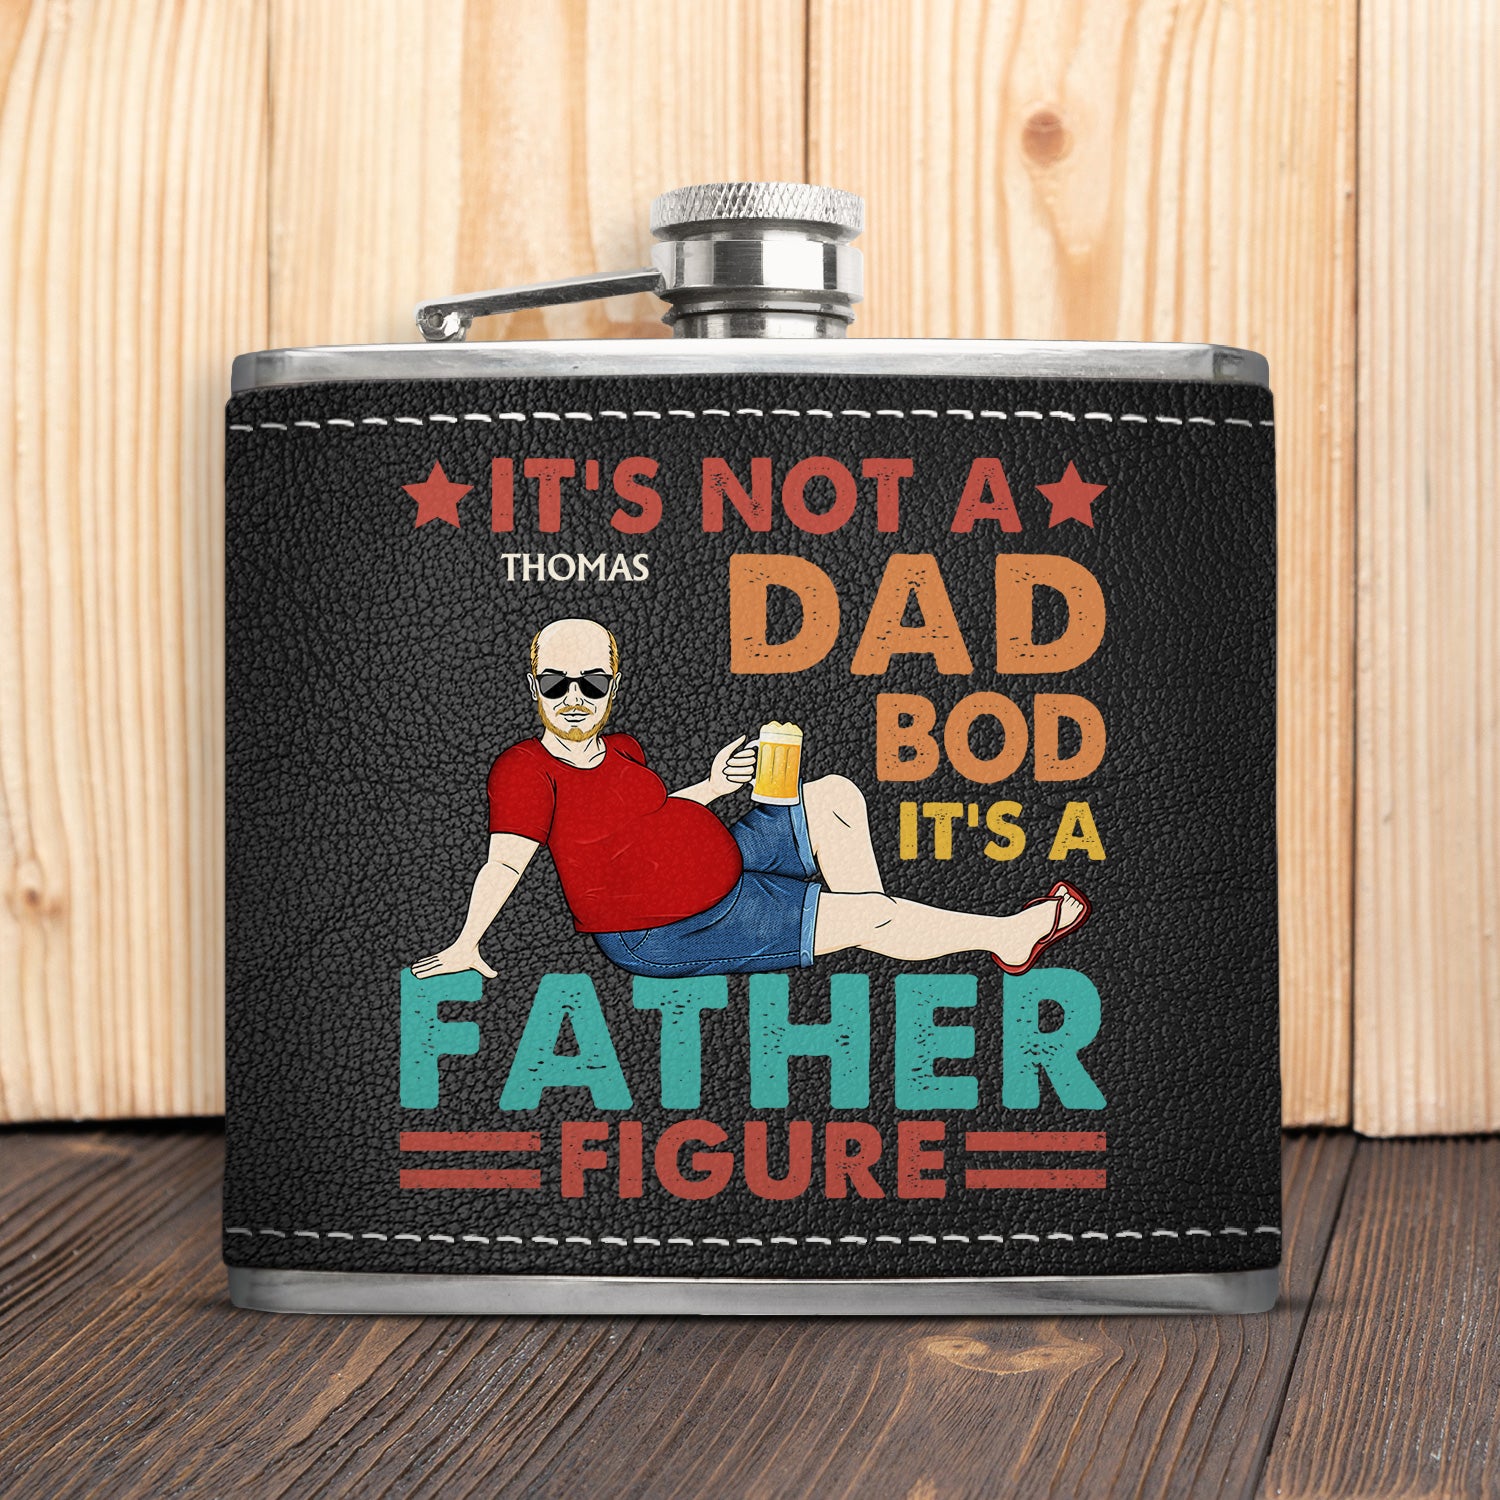 Not A Dad Bod It's Father Figure - Gift For Dad, Grandpa - Personalized Hip Flask